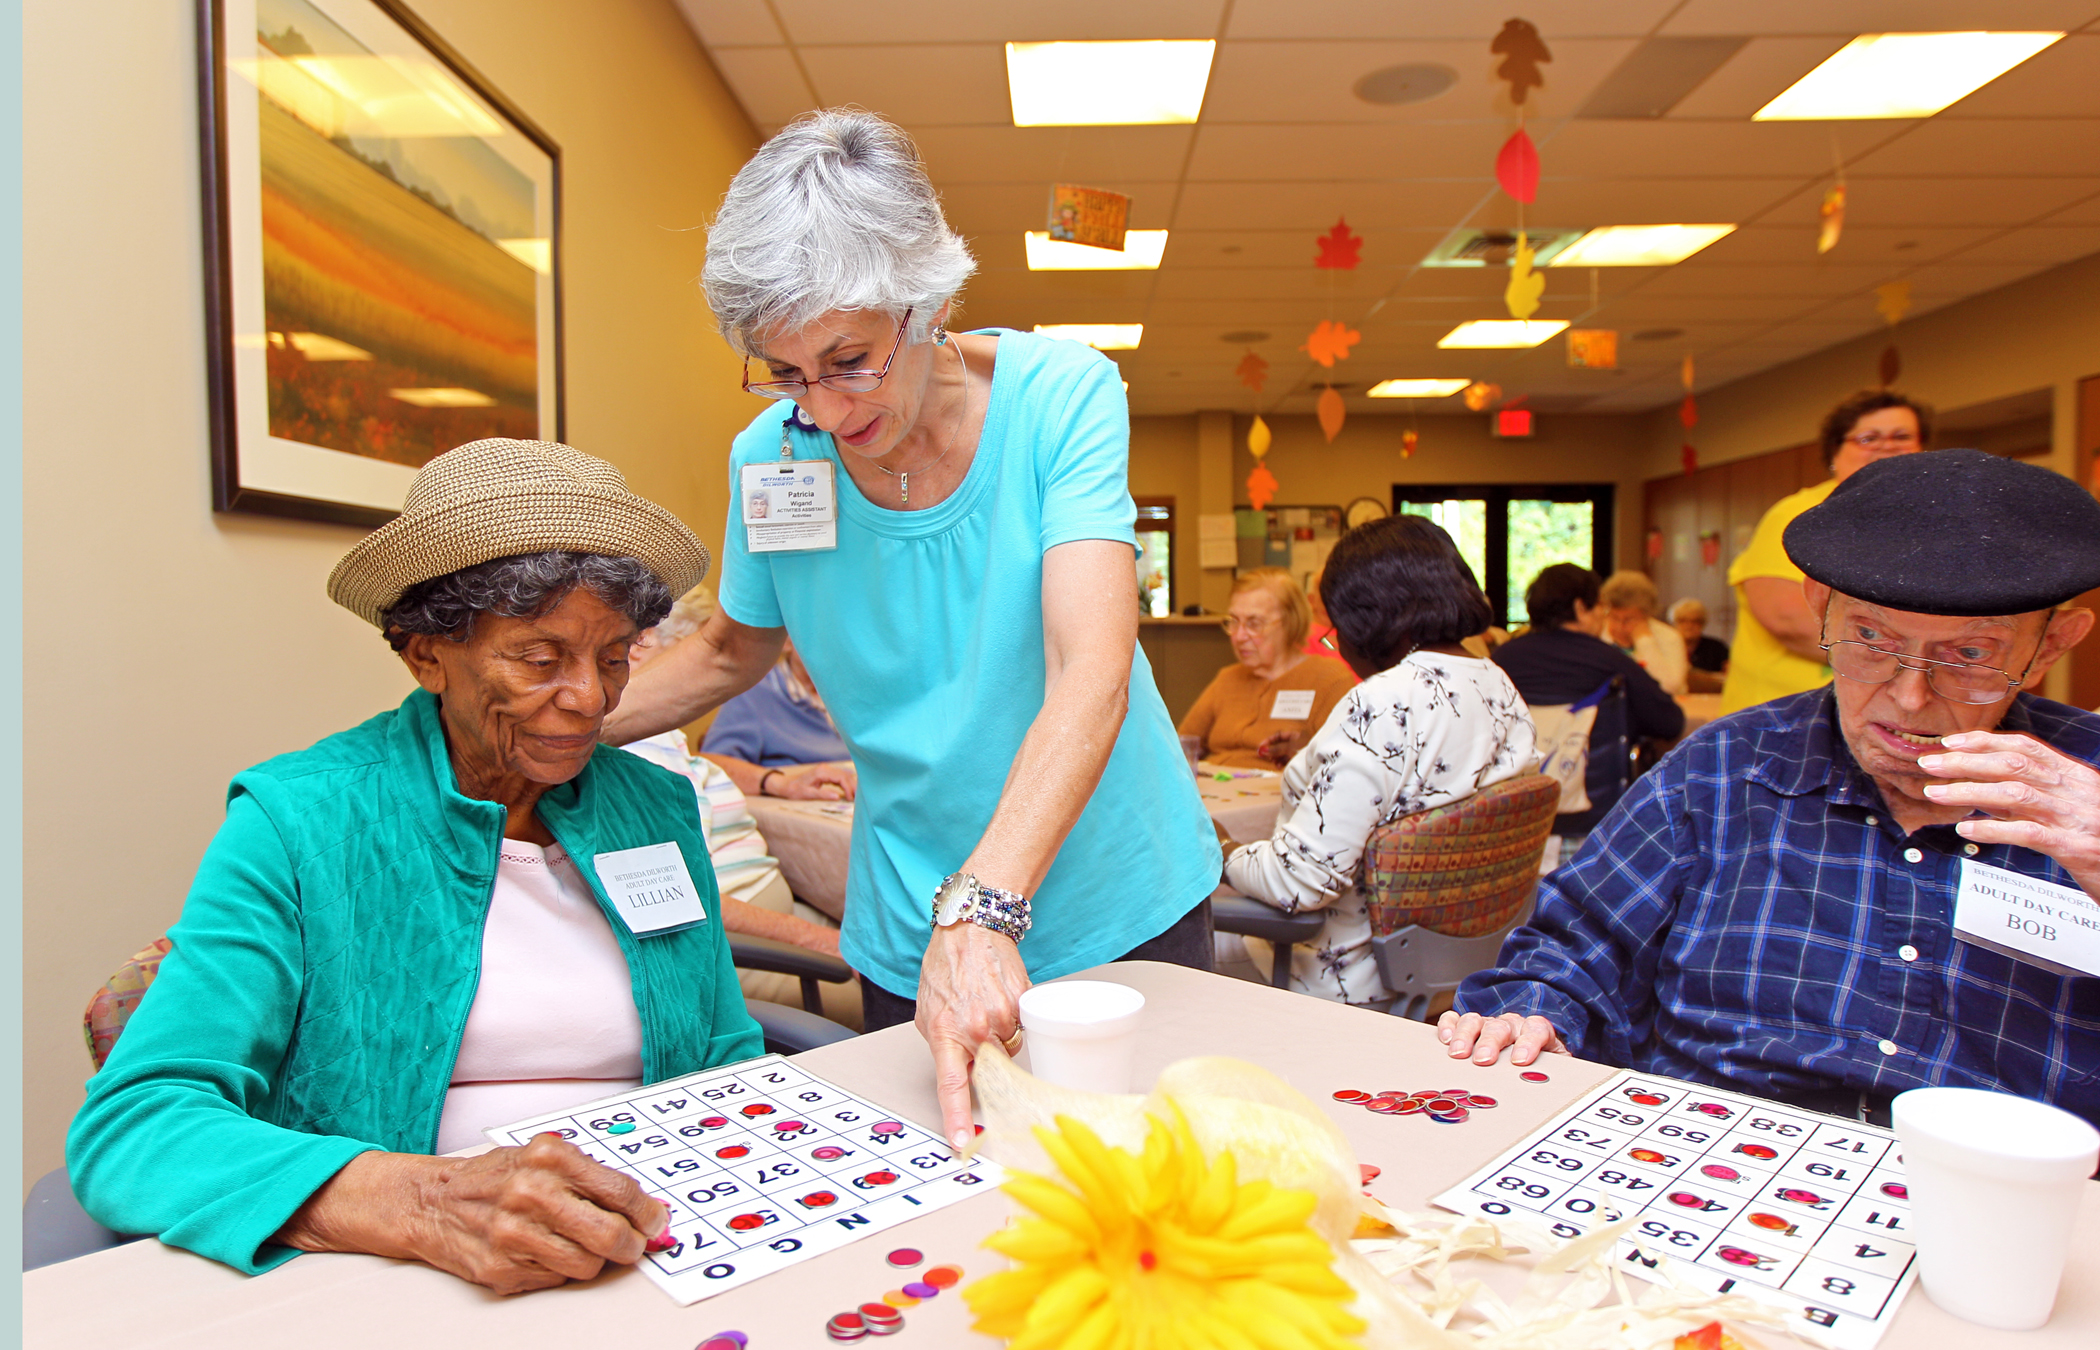 Adult Day Care Activities